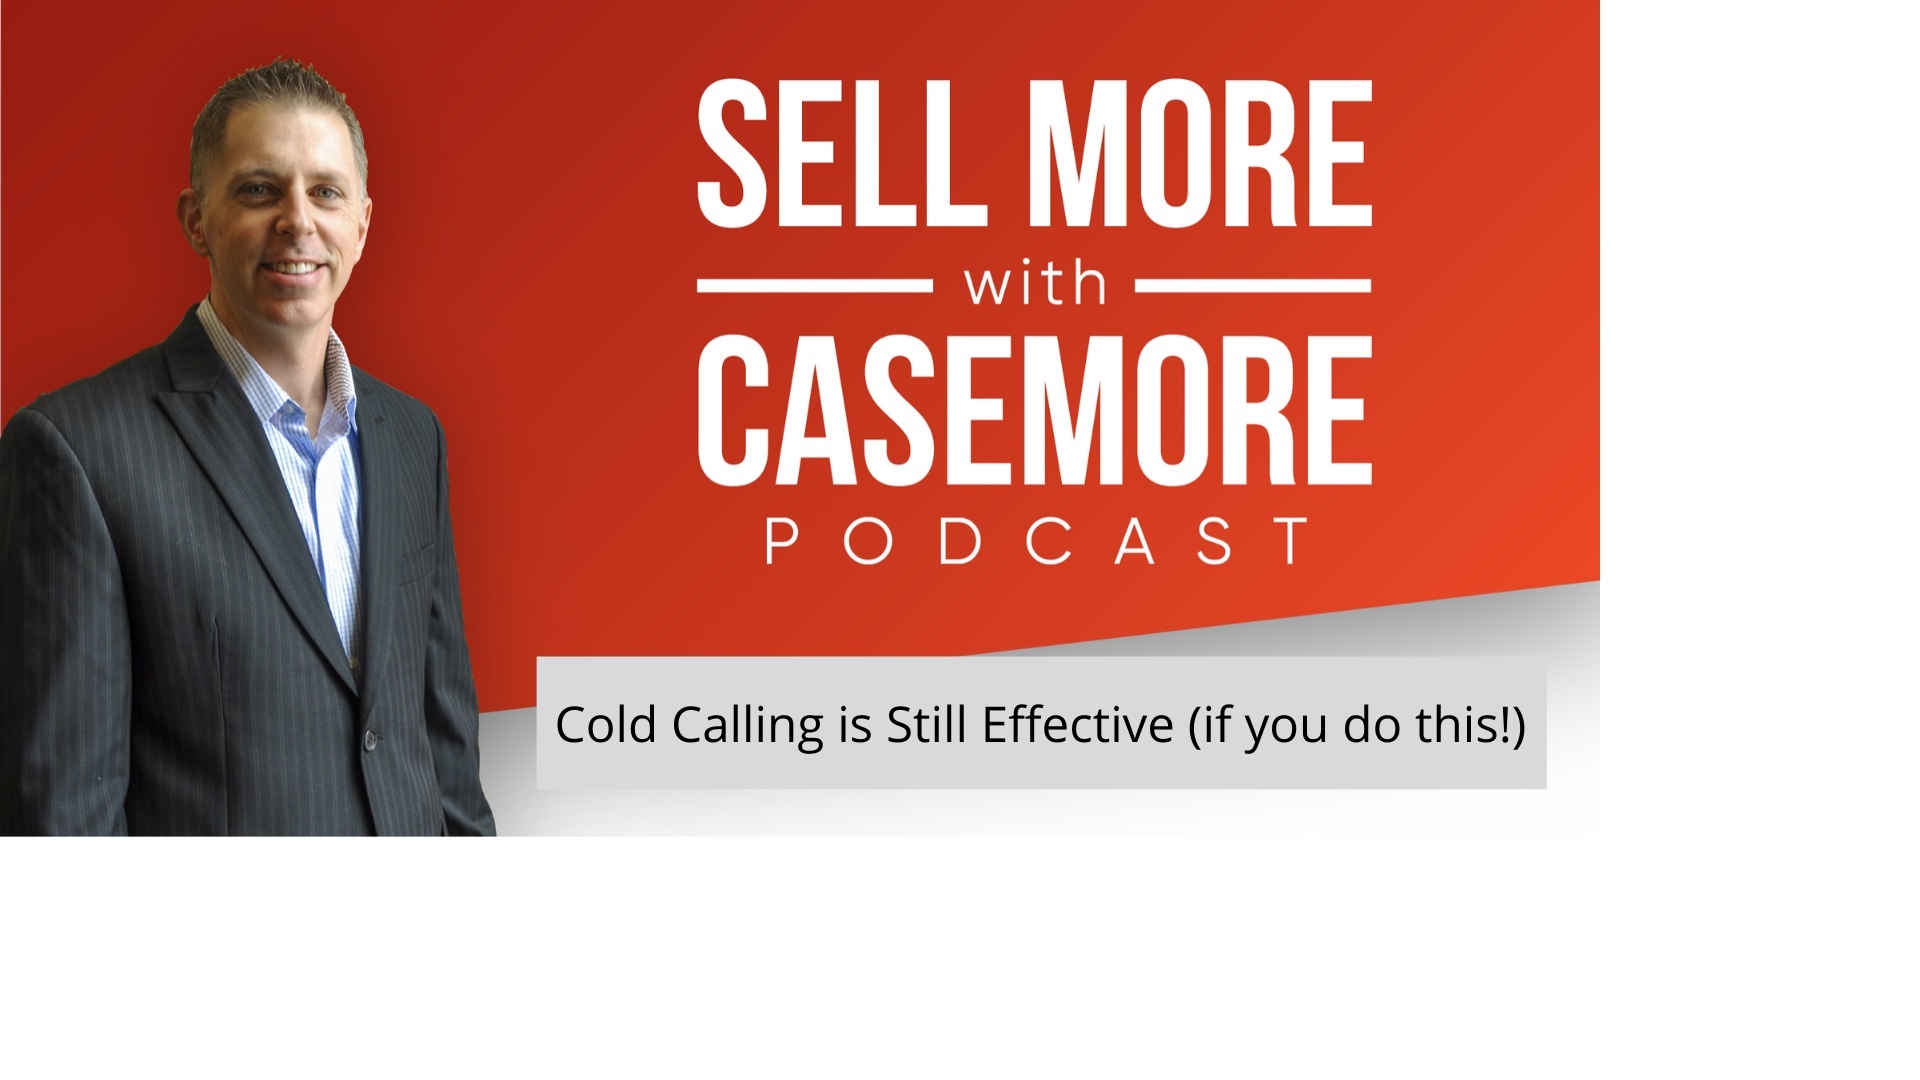 Cold Calling is Still Effective